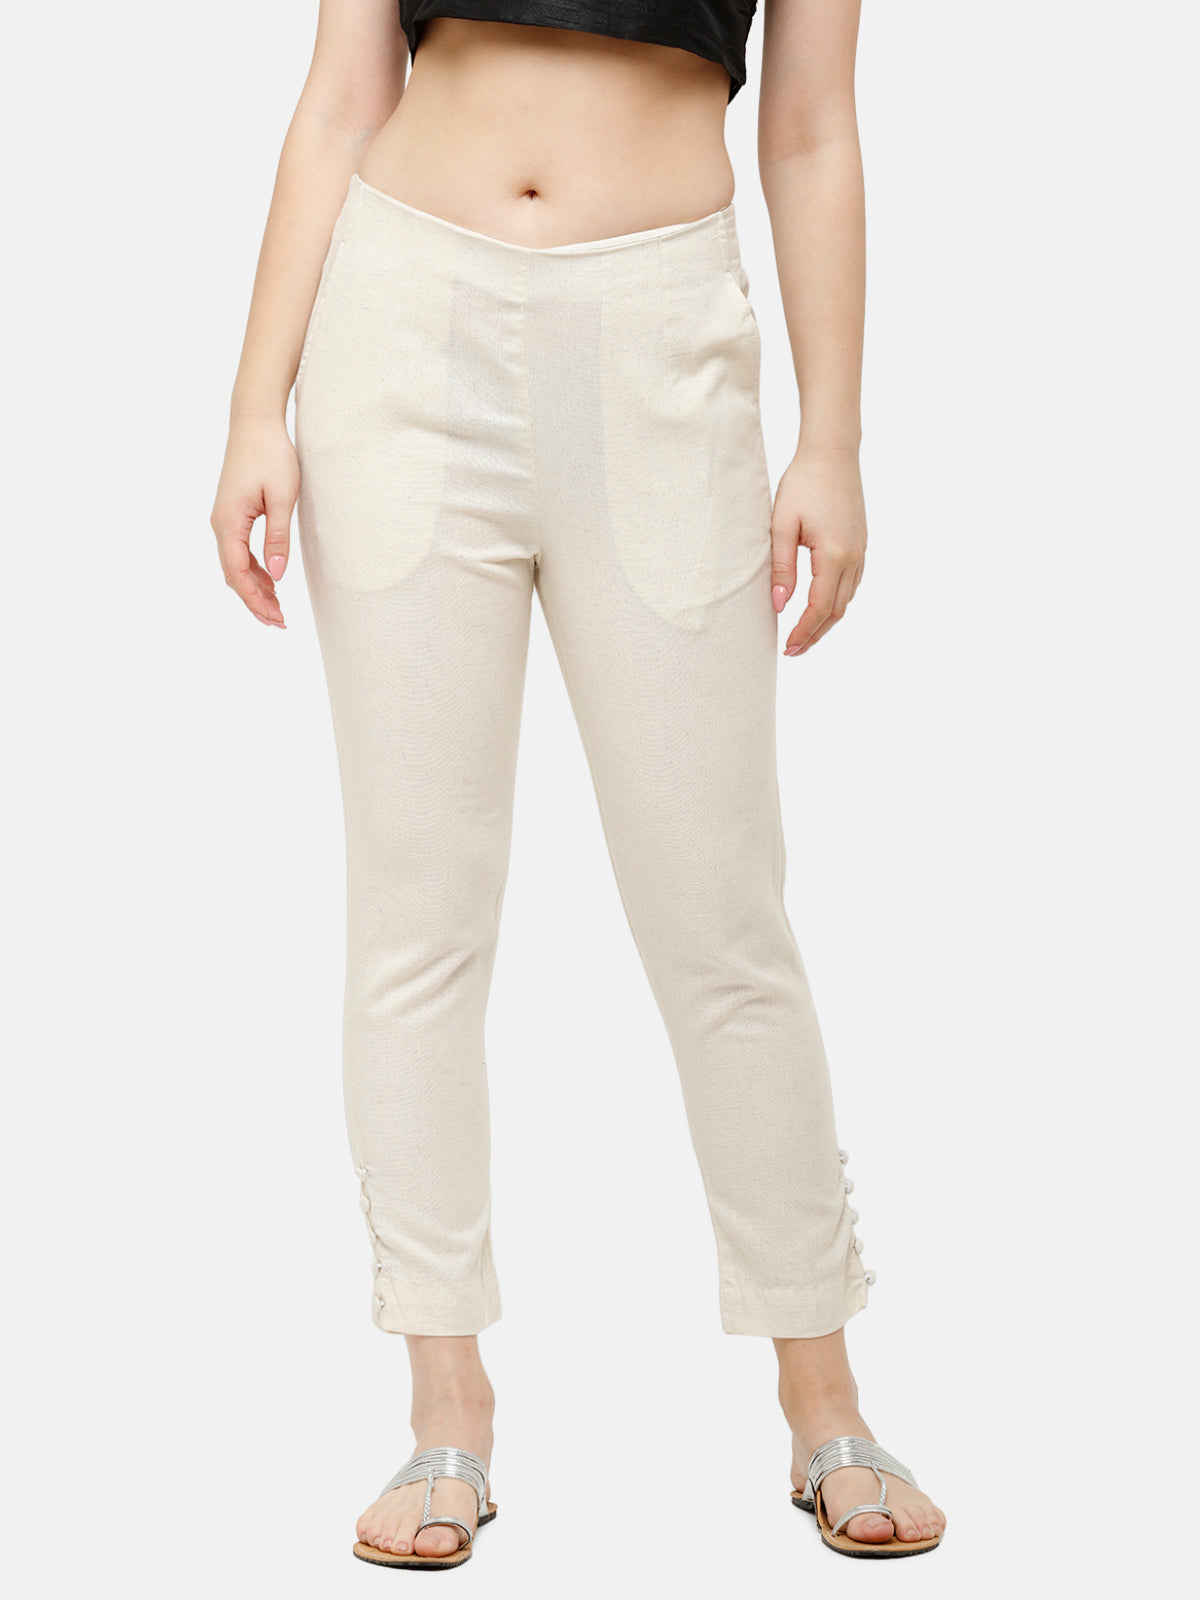 Women's Cigarette Pants | Made to Measure - Sumissura